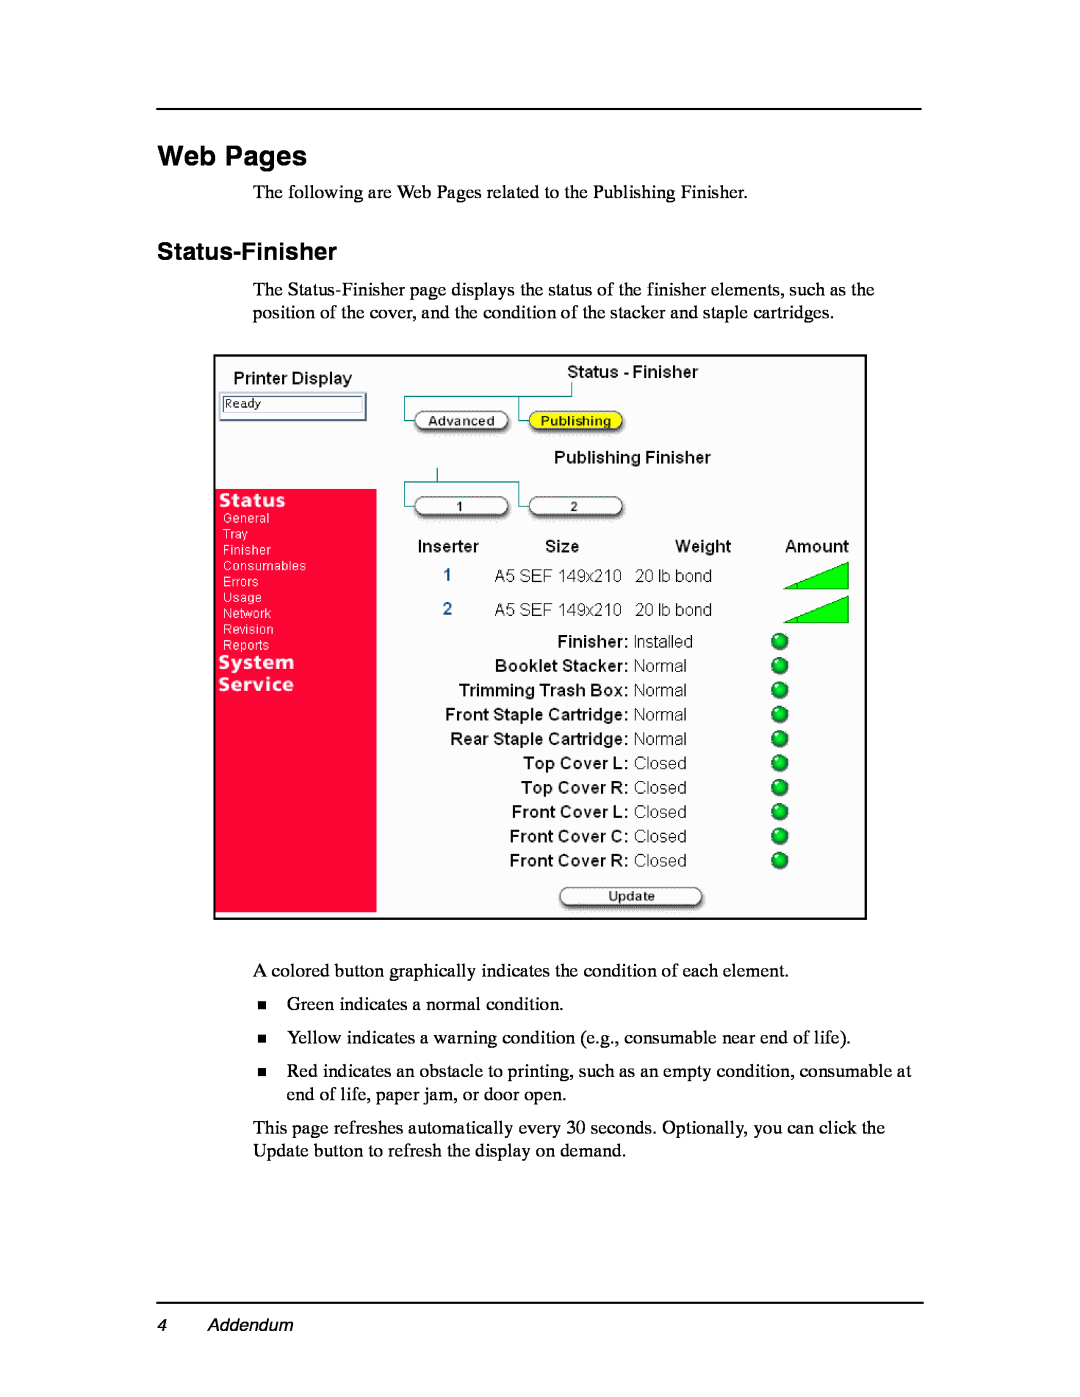 Ricoh DDP 184 manual Web Pages, Status-Finisher 